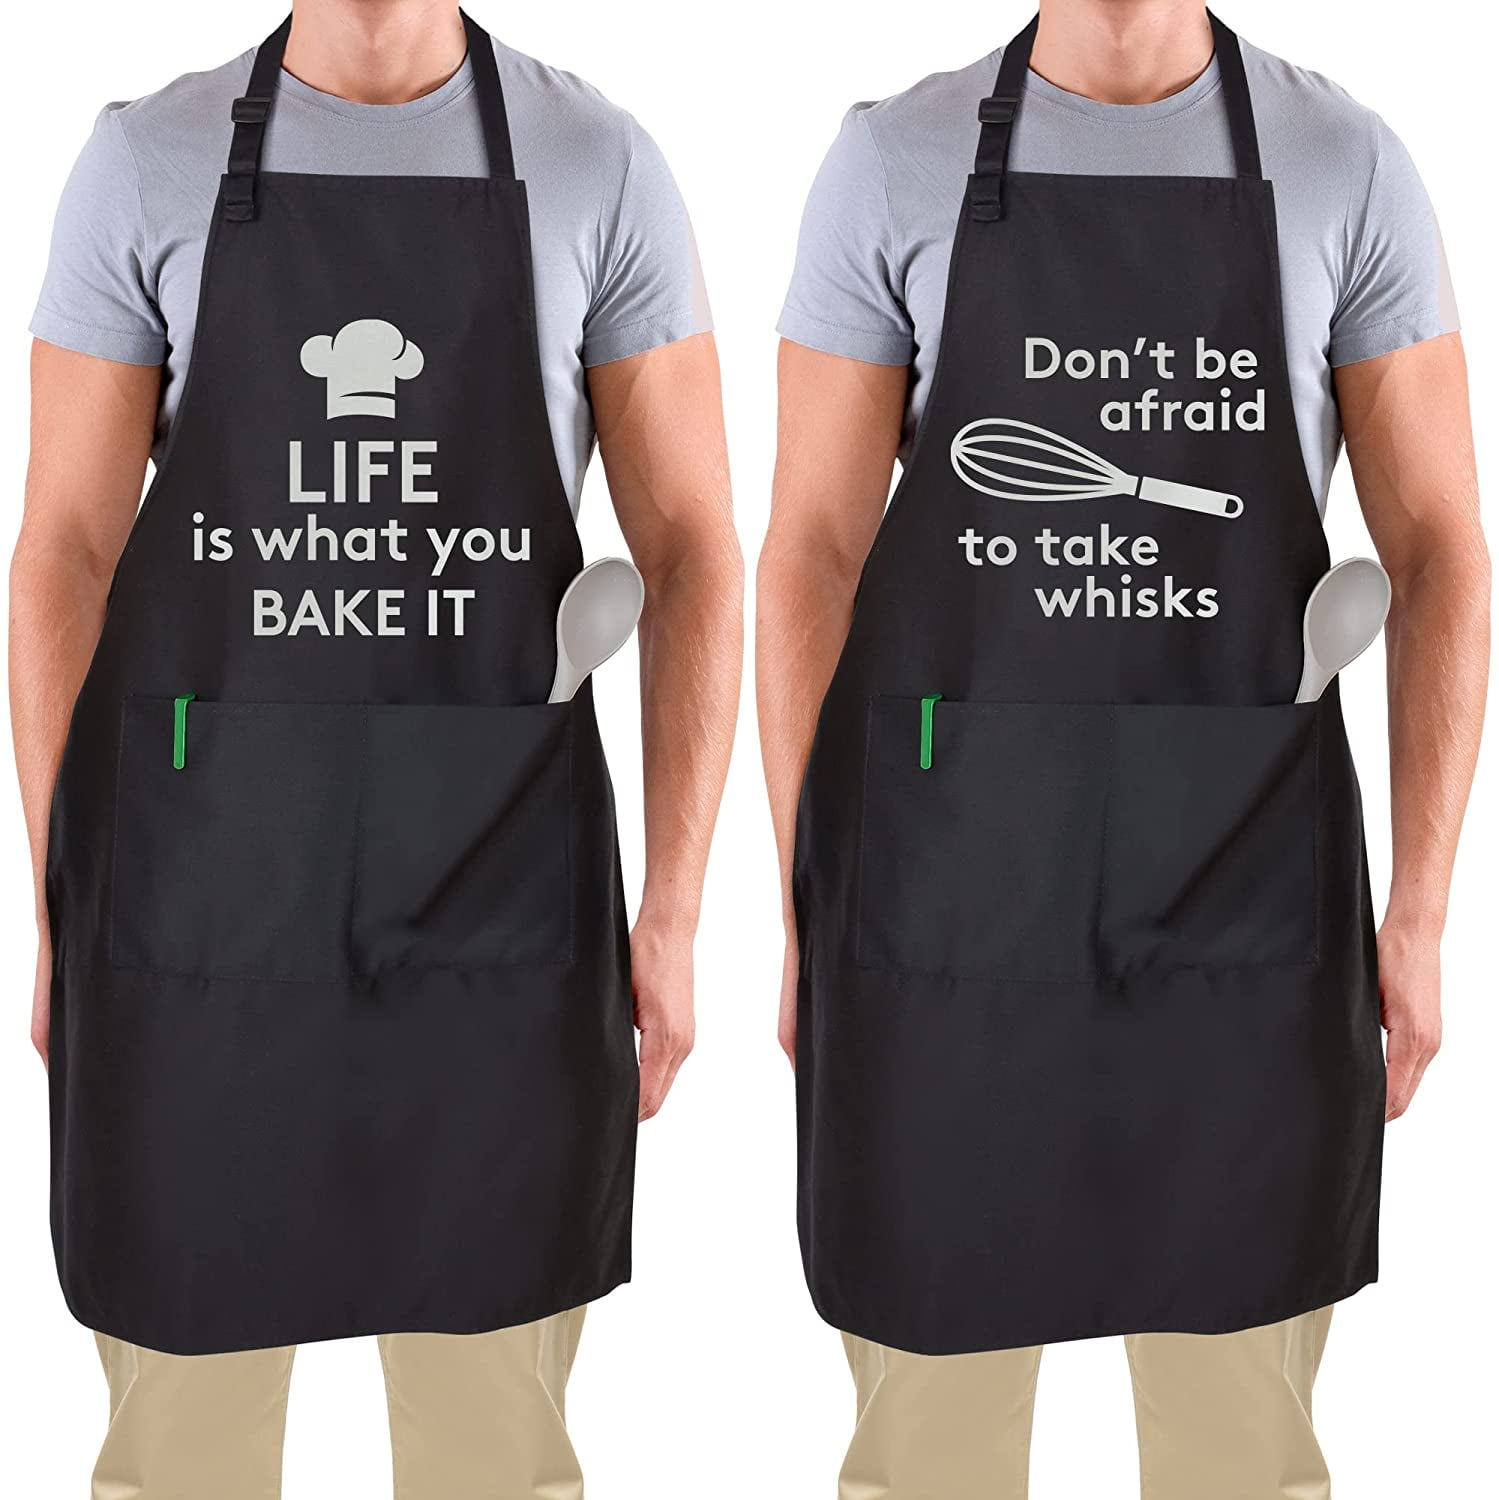 10 Best Aprons for Women - Cute and Funny Kitchen Aprons to Cook In